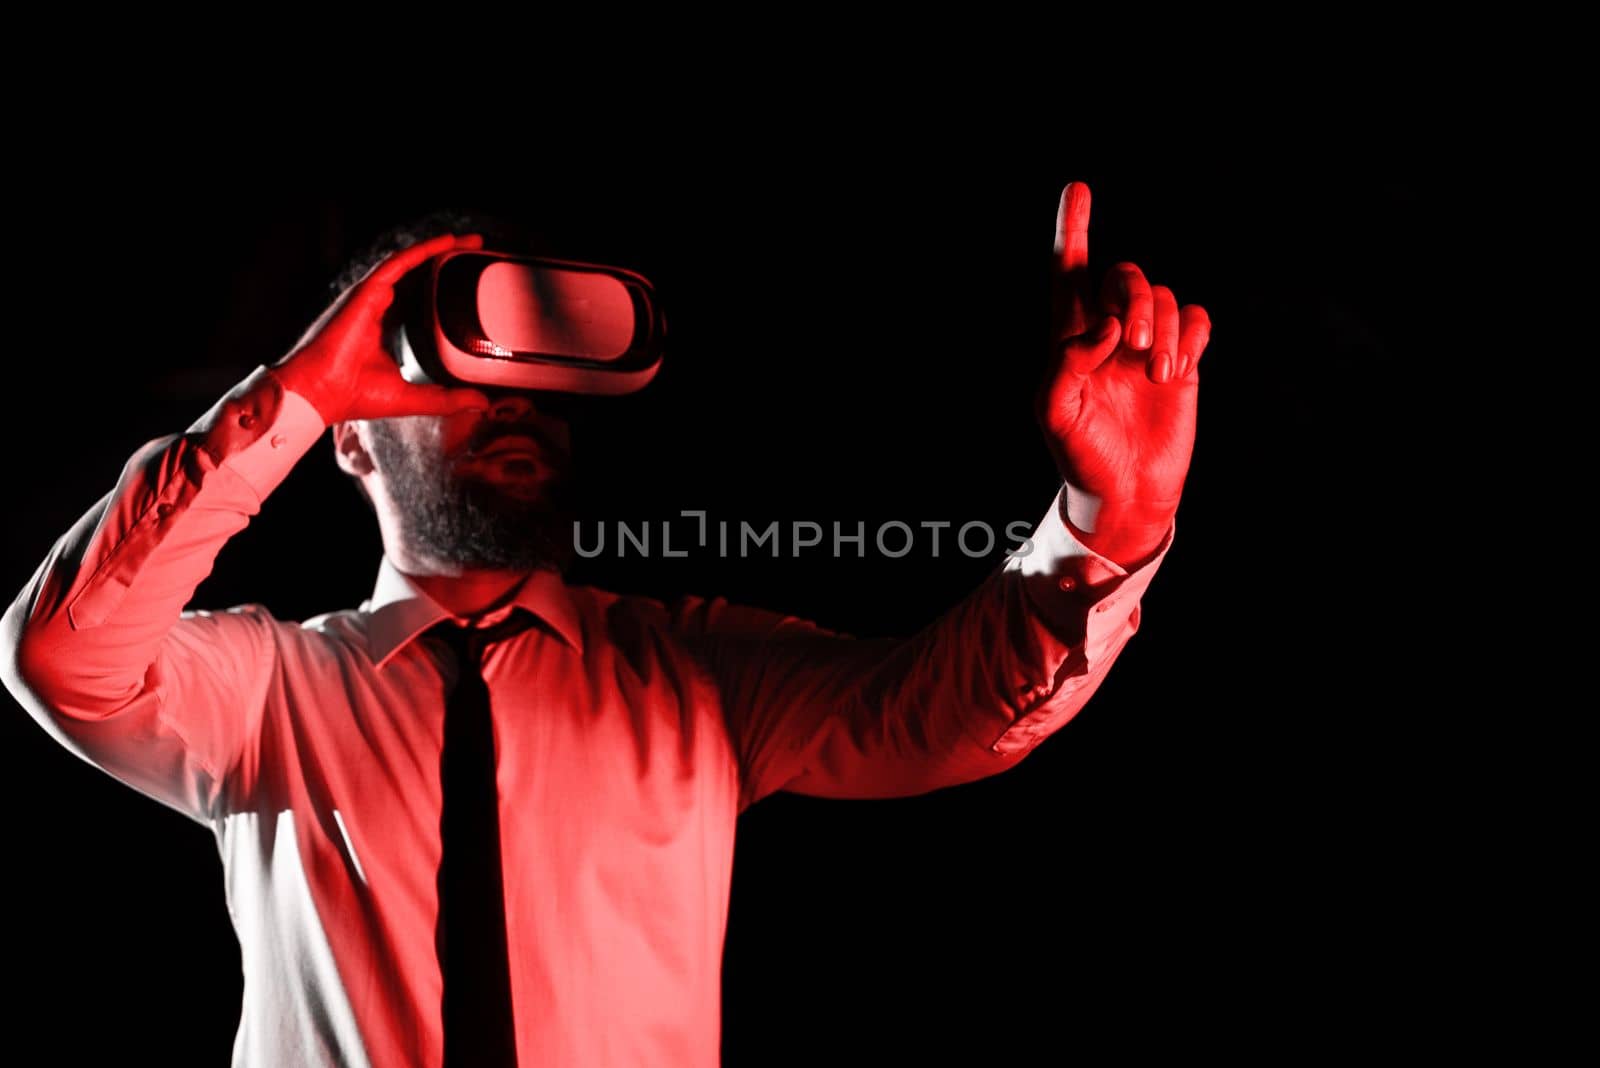 Man Wearing Vr Glasses And Pointing On Important Messages With One Finger.